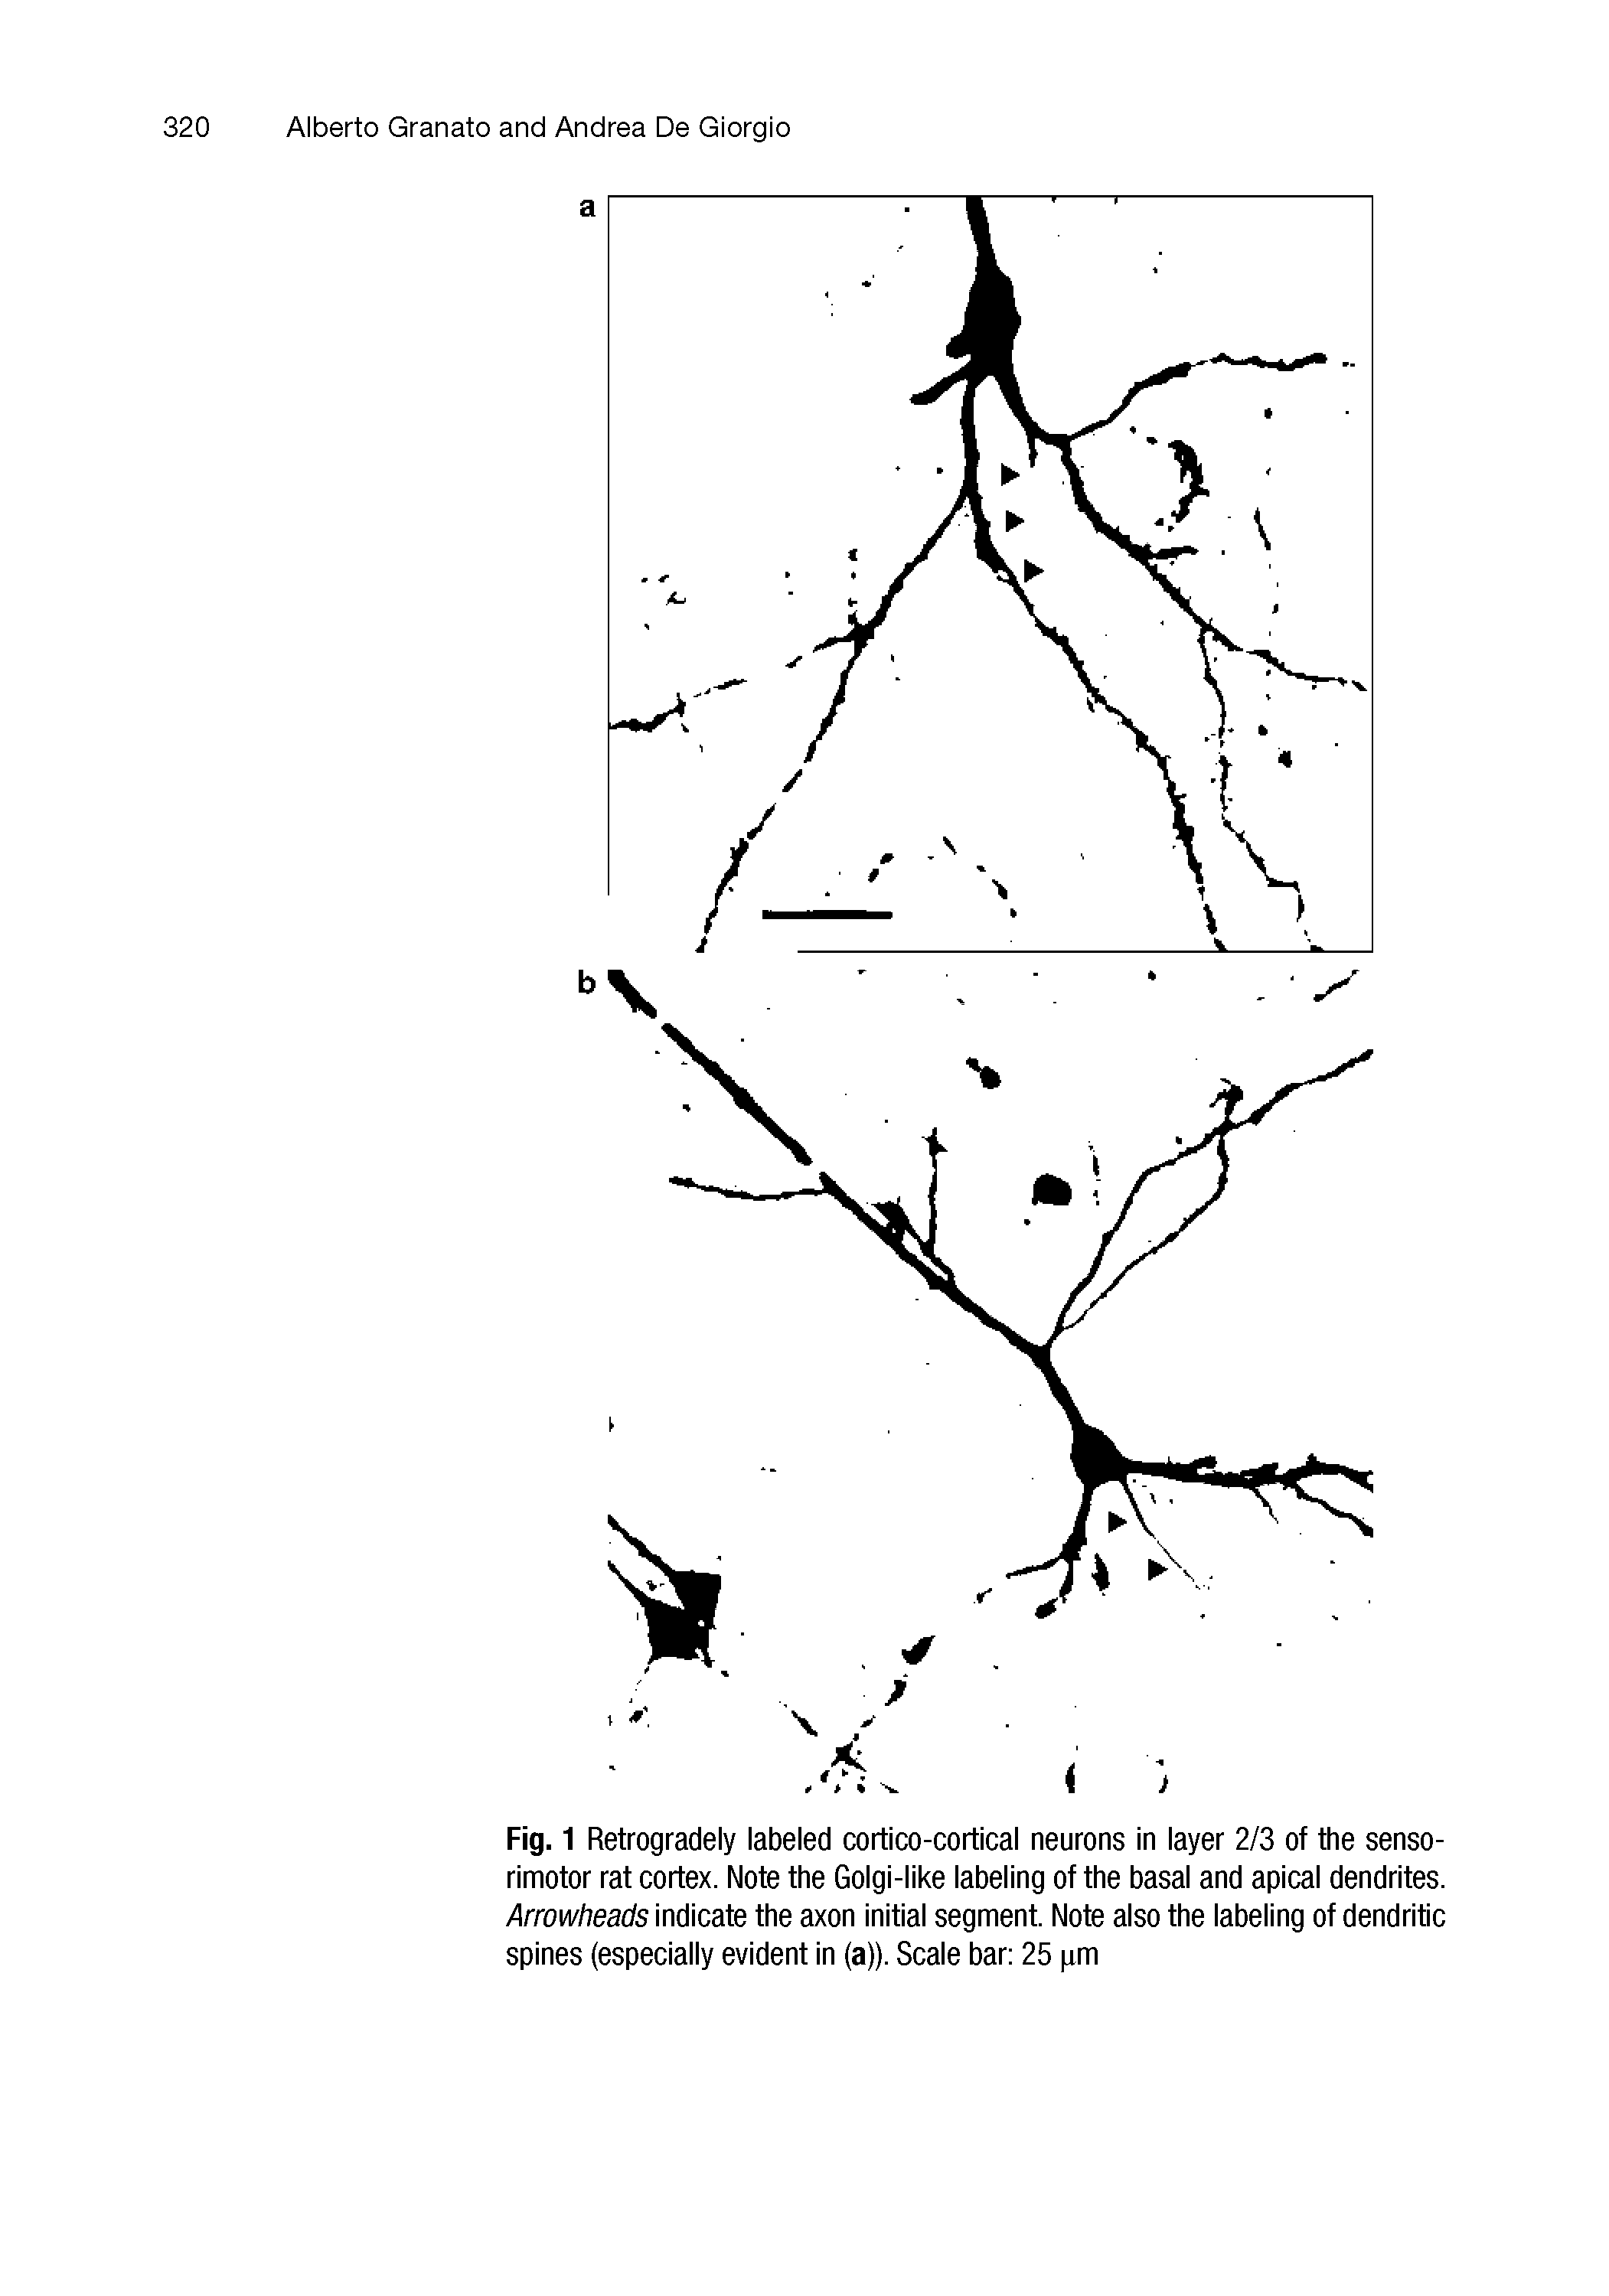 Fig. 1 Retrogradely labeled cortico-cortical neurons in layer 2/3 of the sensorimotor rat cortex. Note the Golgi-like labeling of the basal and apical dendrites. Arrowheads indicate the axon initial segment. Note also the labeling of dendritic spines (especially evident in (a)). Scale bar 25 pm...